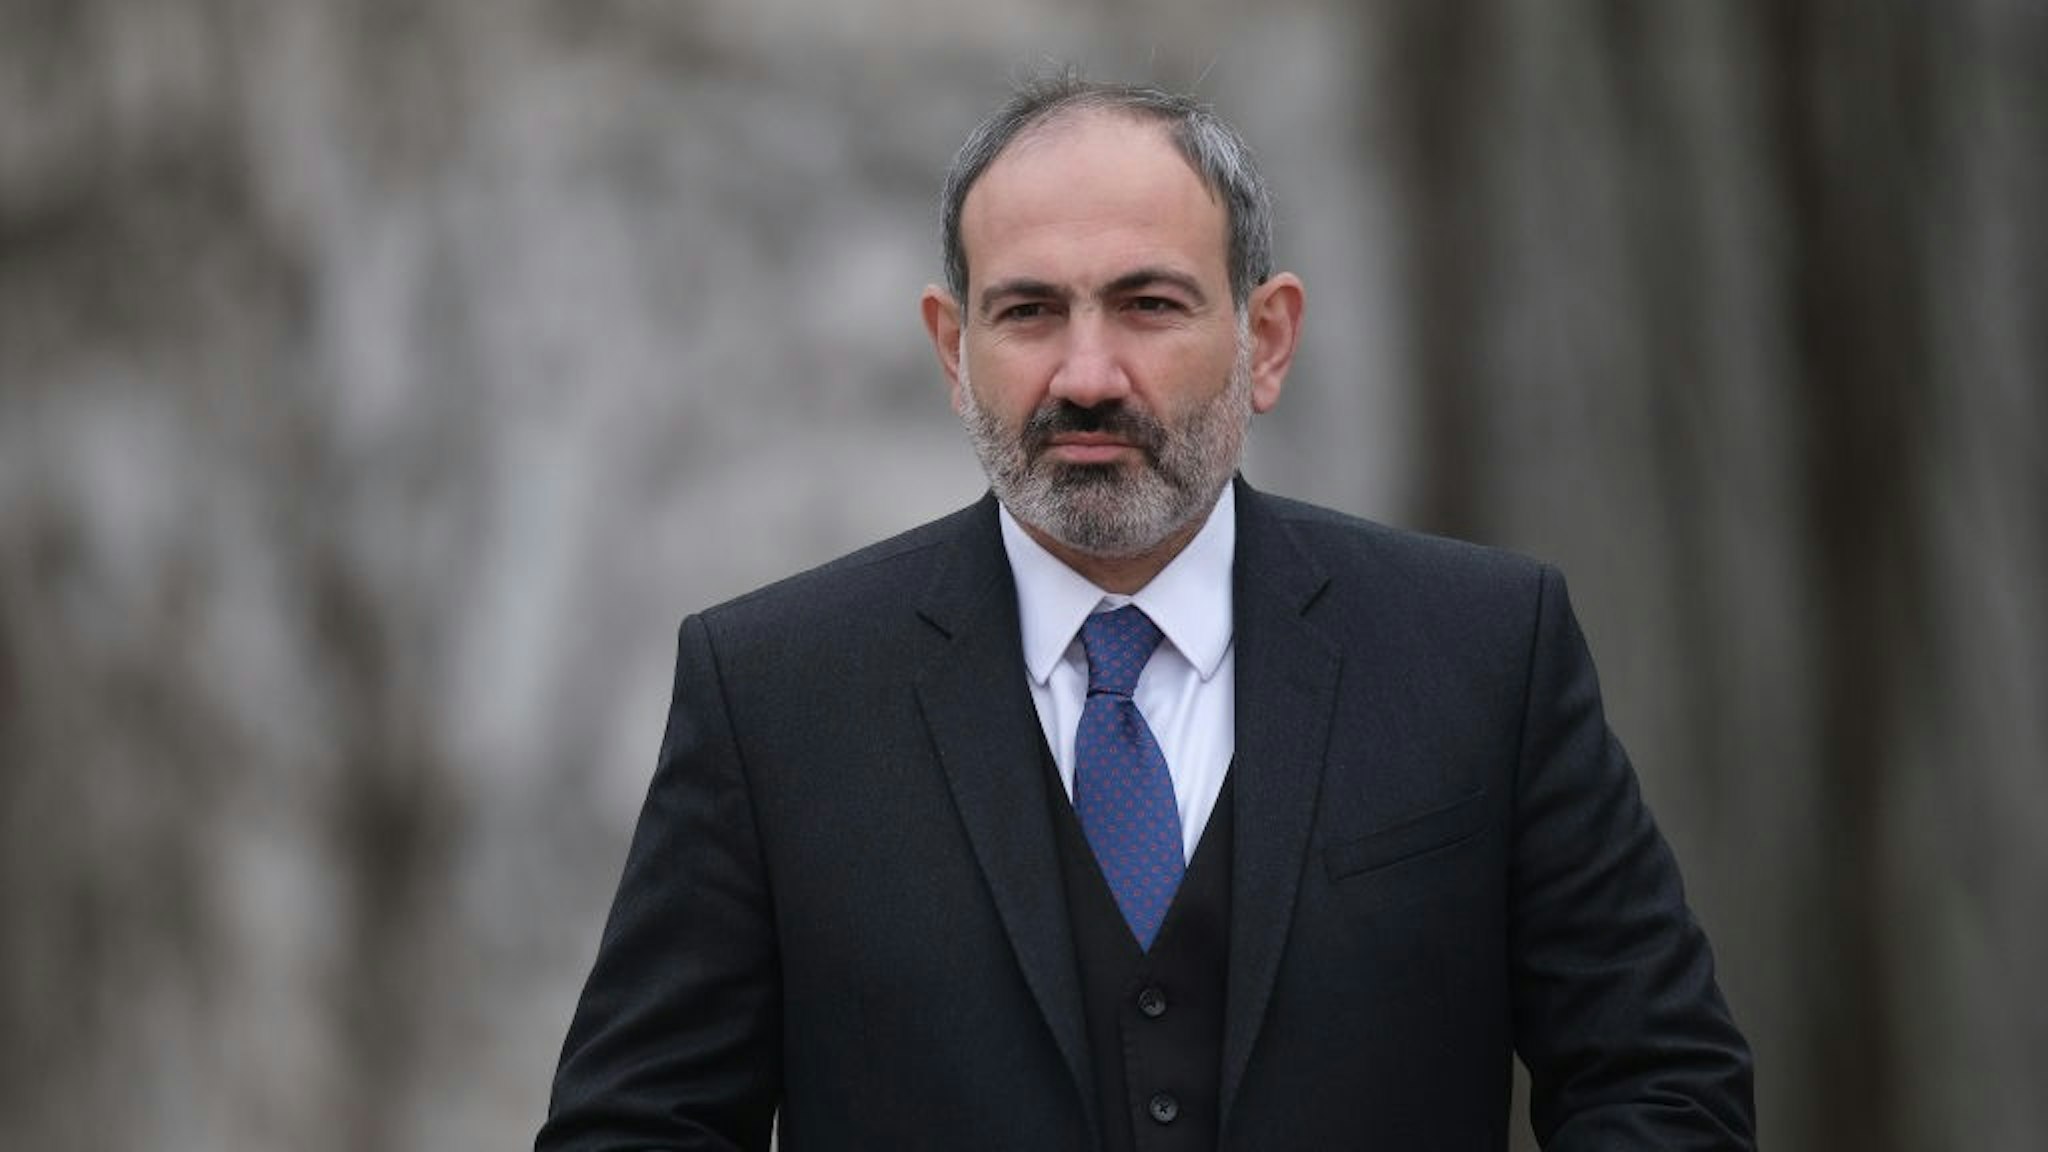 BERLIN, GERMANY - FEBRUARY 01: Armenian Prime Minister Nikol Pashinyan arrives to meet German Chancellor Angela Merkel at the Chancellery on February 01, 2019 in Berlin, Germany. Pashinyan is in Berlin to meet with Merkel, President Steinmeier and Bundestag President Schäuble. (Photo by Sean Gallup/Getty Images)